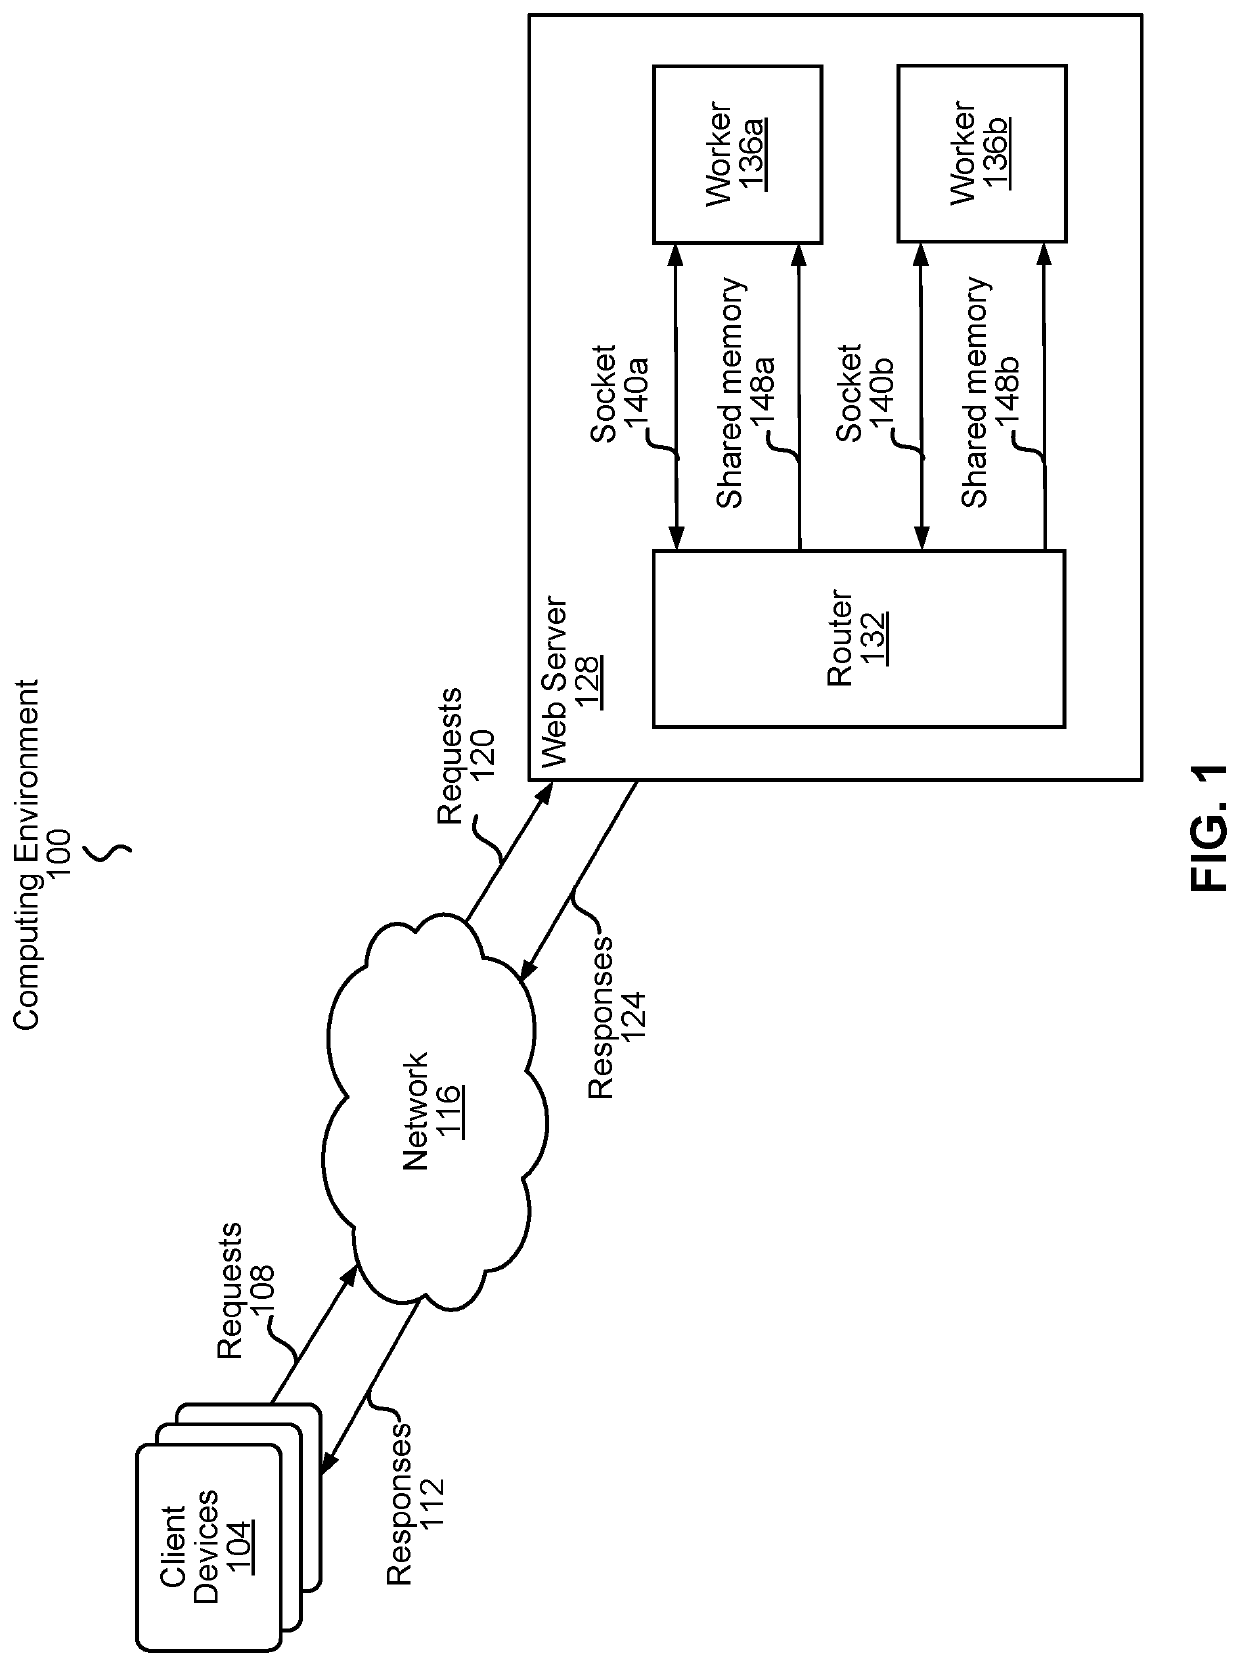 Pipelined request processing using shared memory